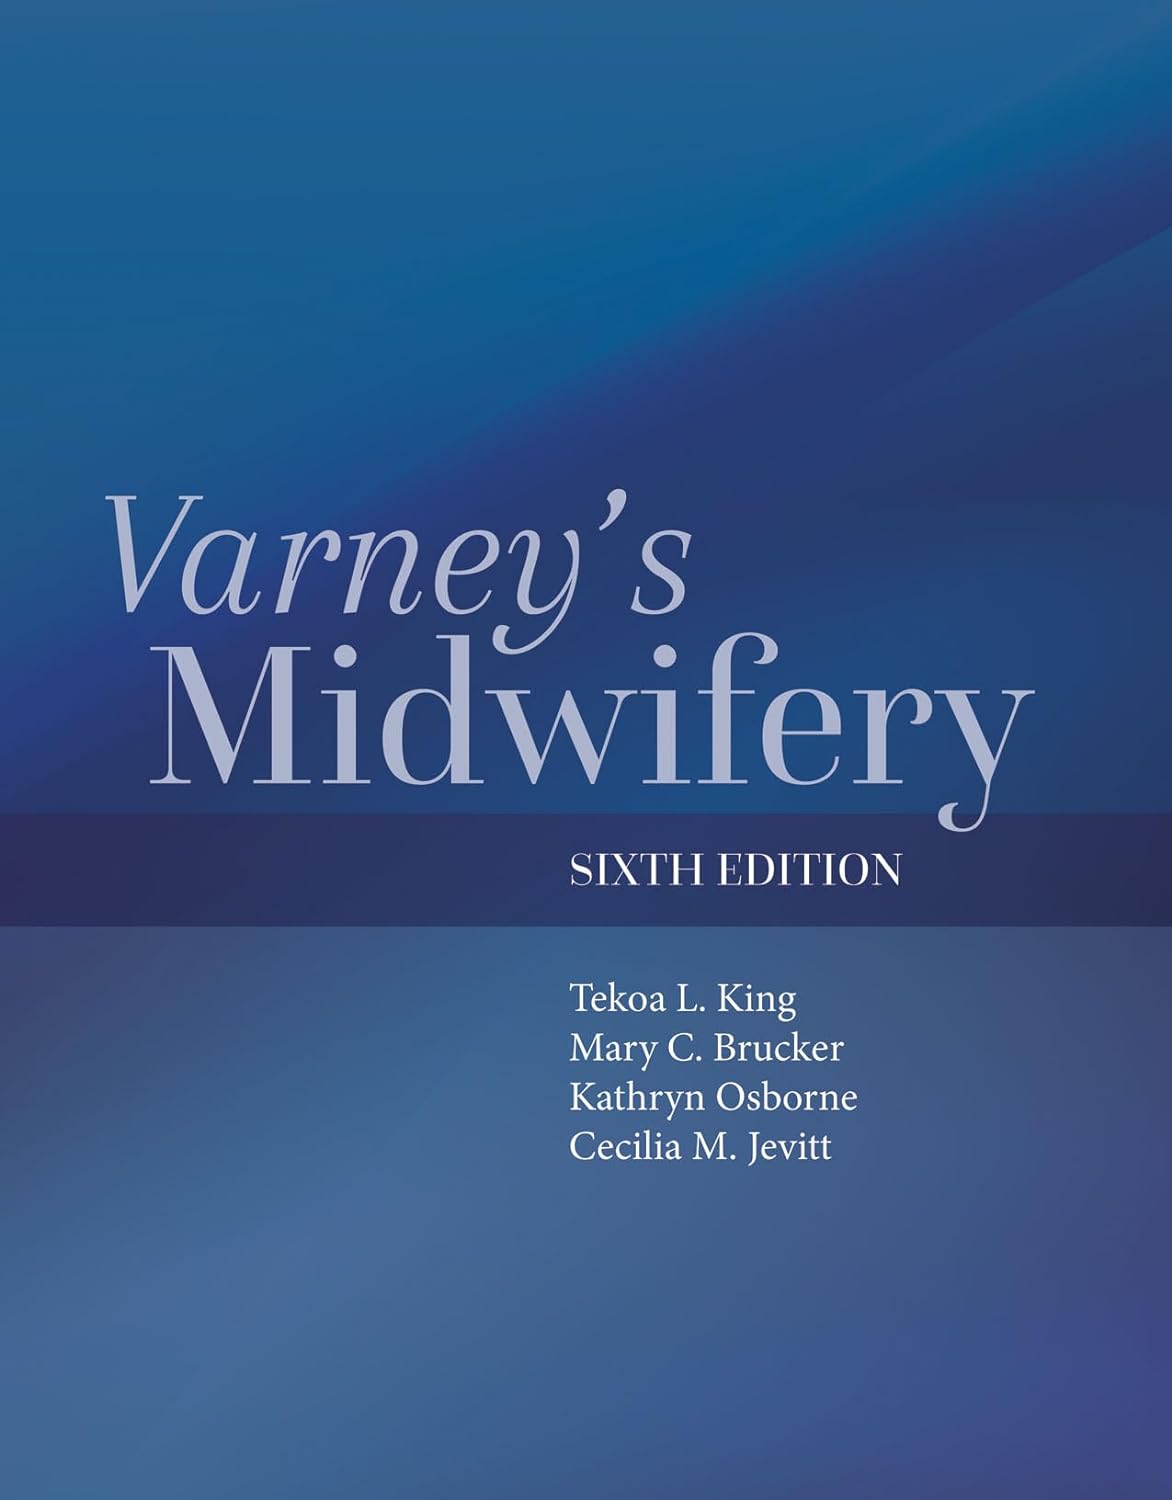 a picture of the cover image of the test bank for Varney’s Midwifery textbook